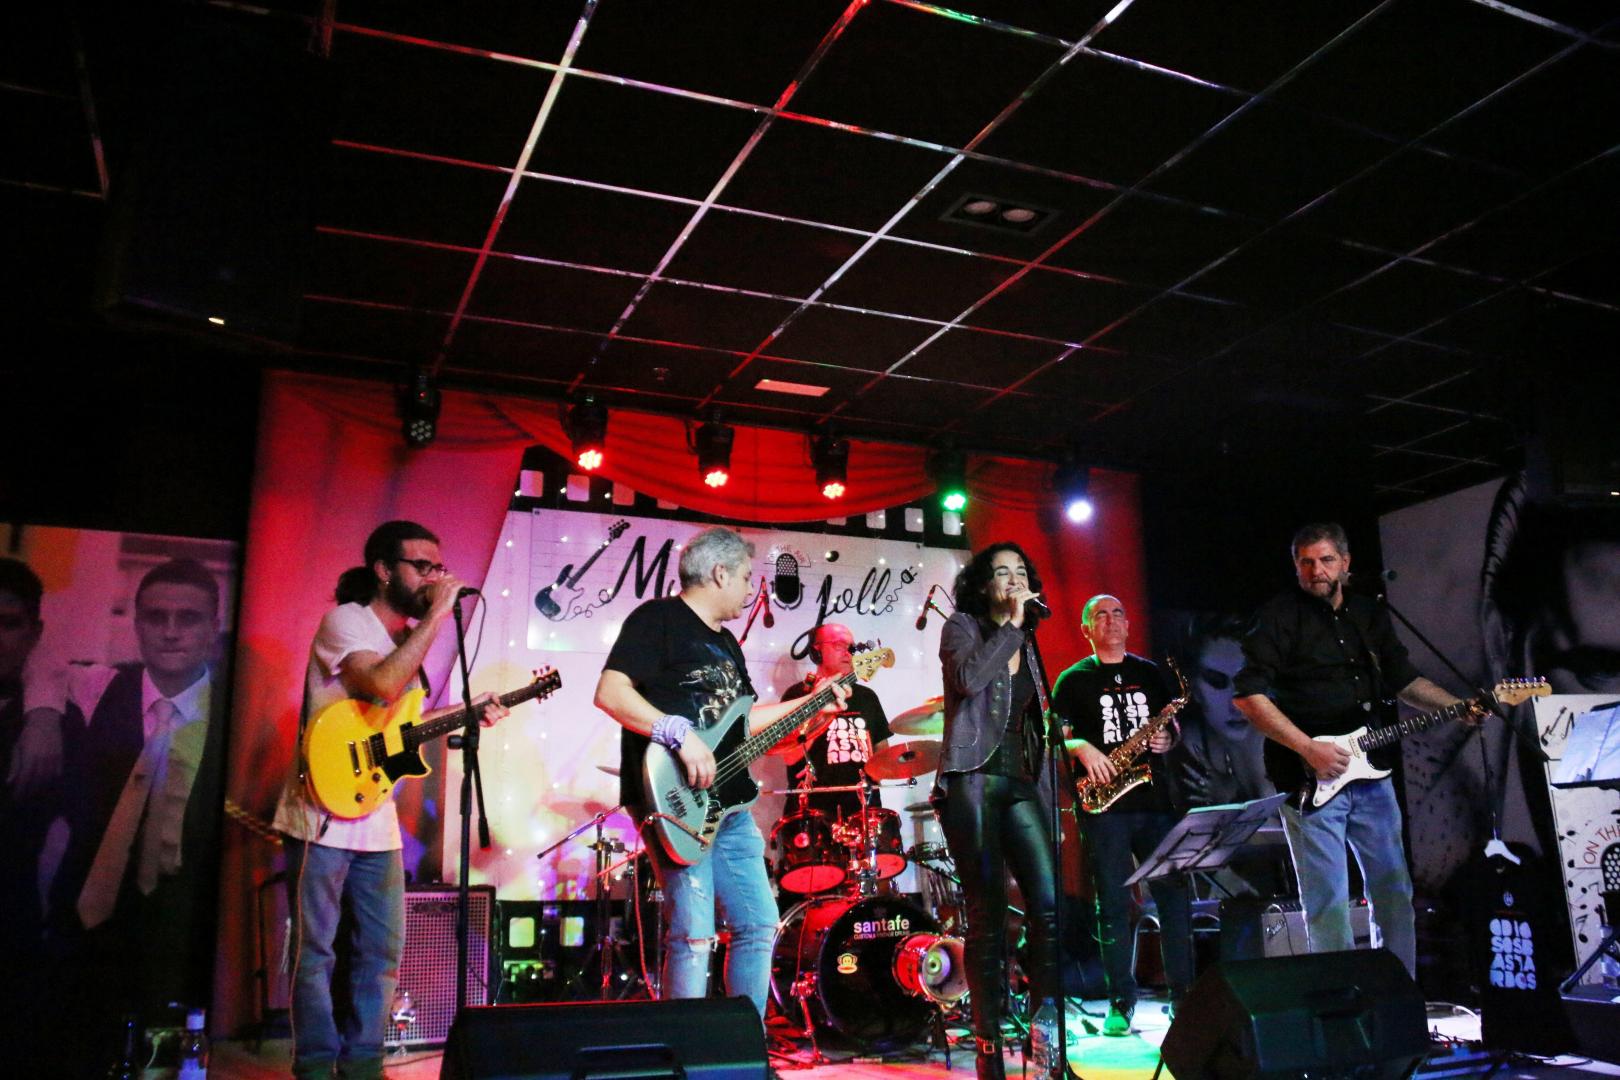 Concierto Dirty belly band Music Joll marzo 2019